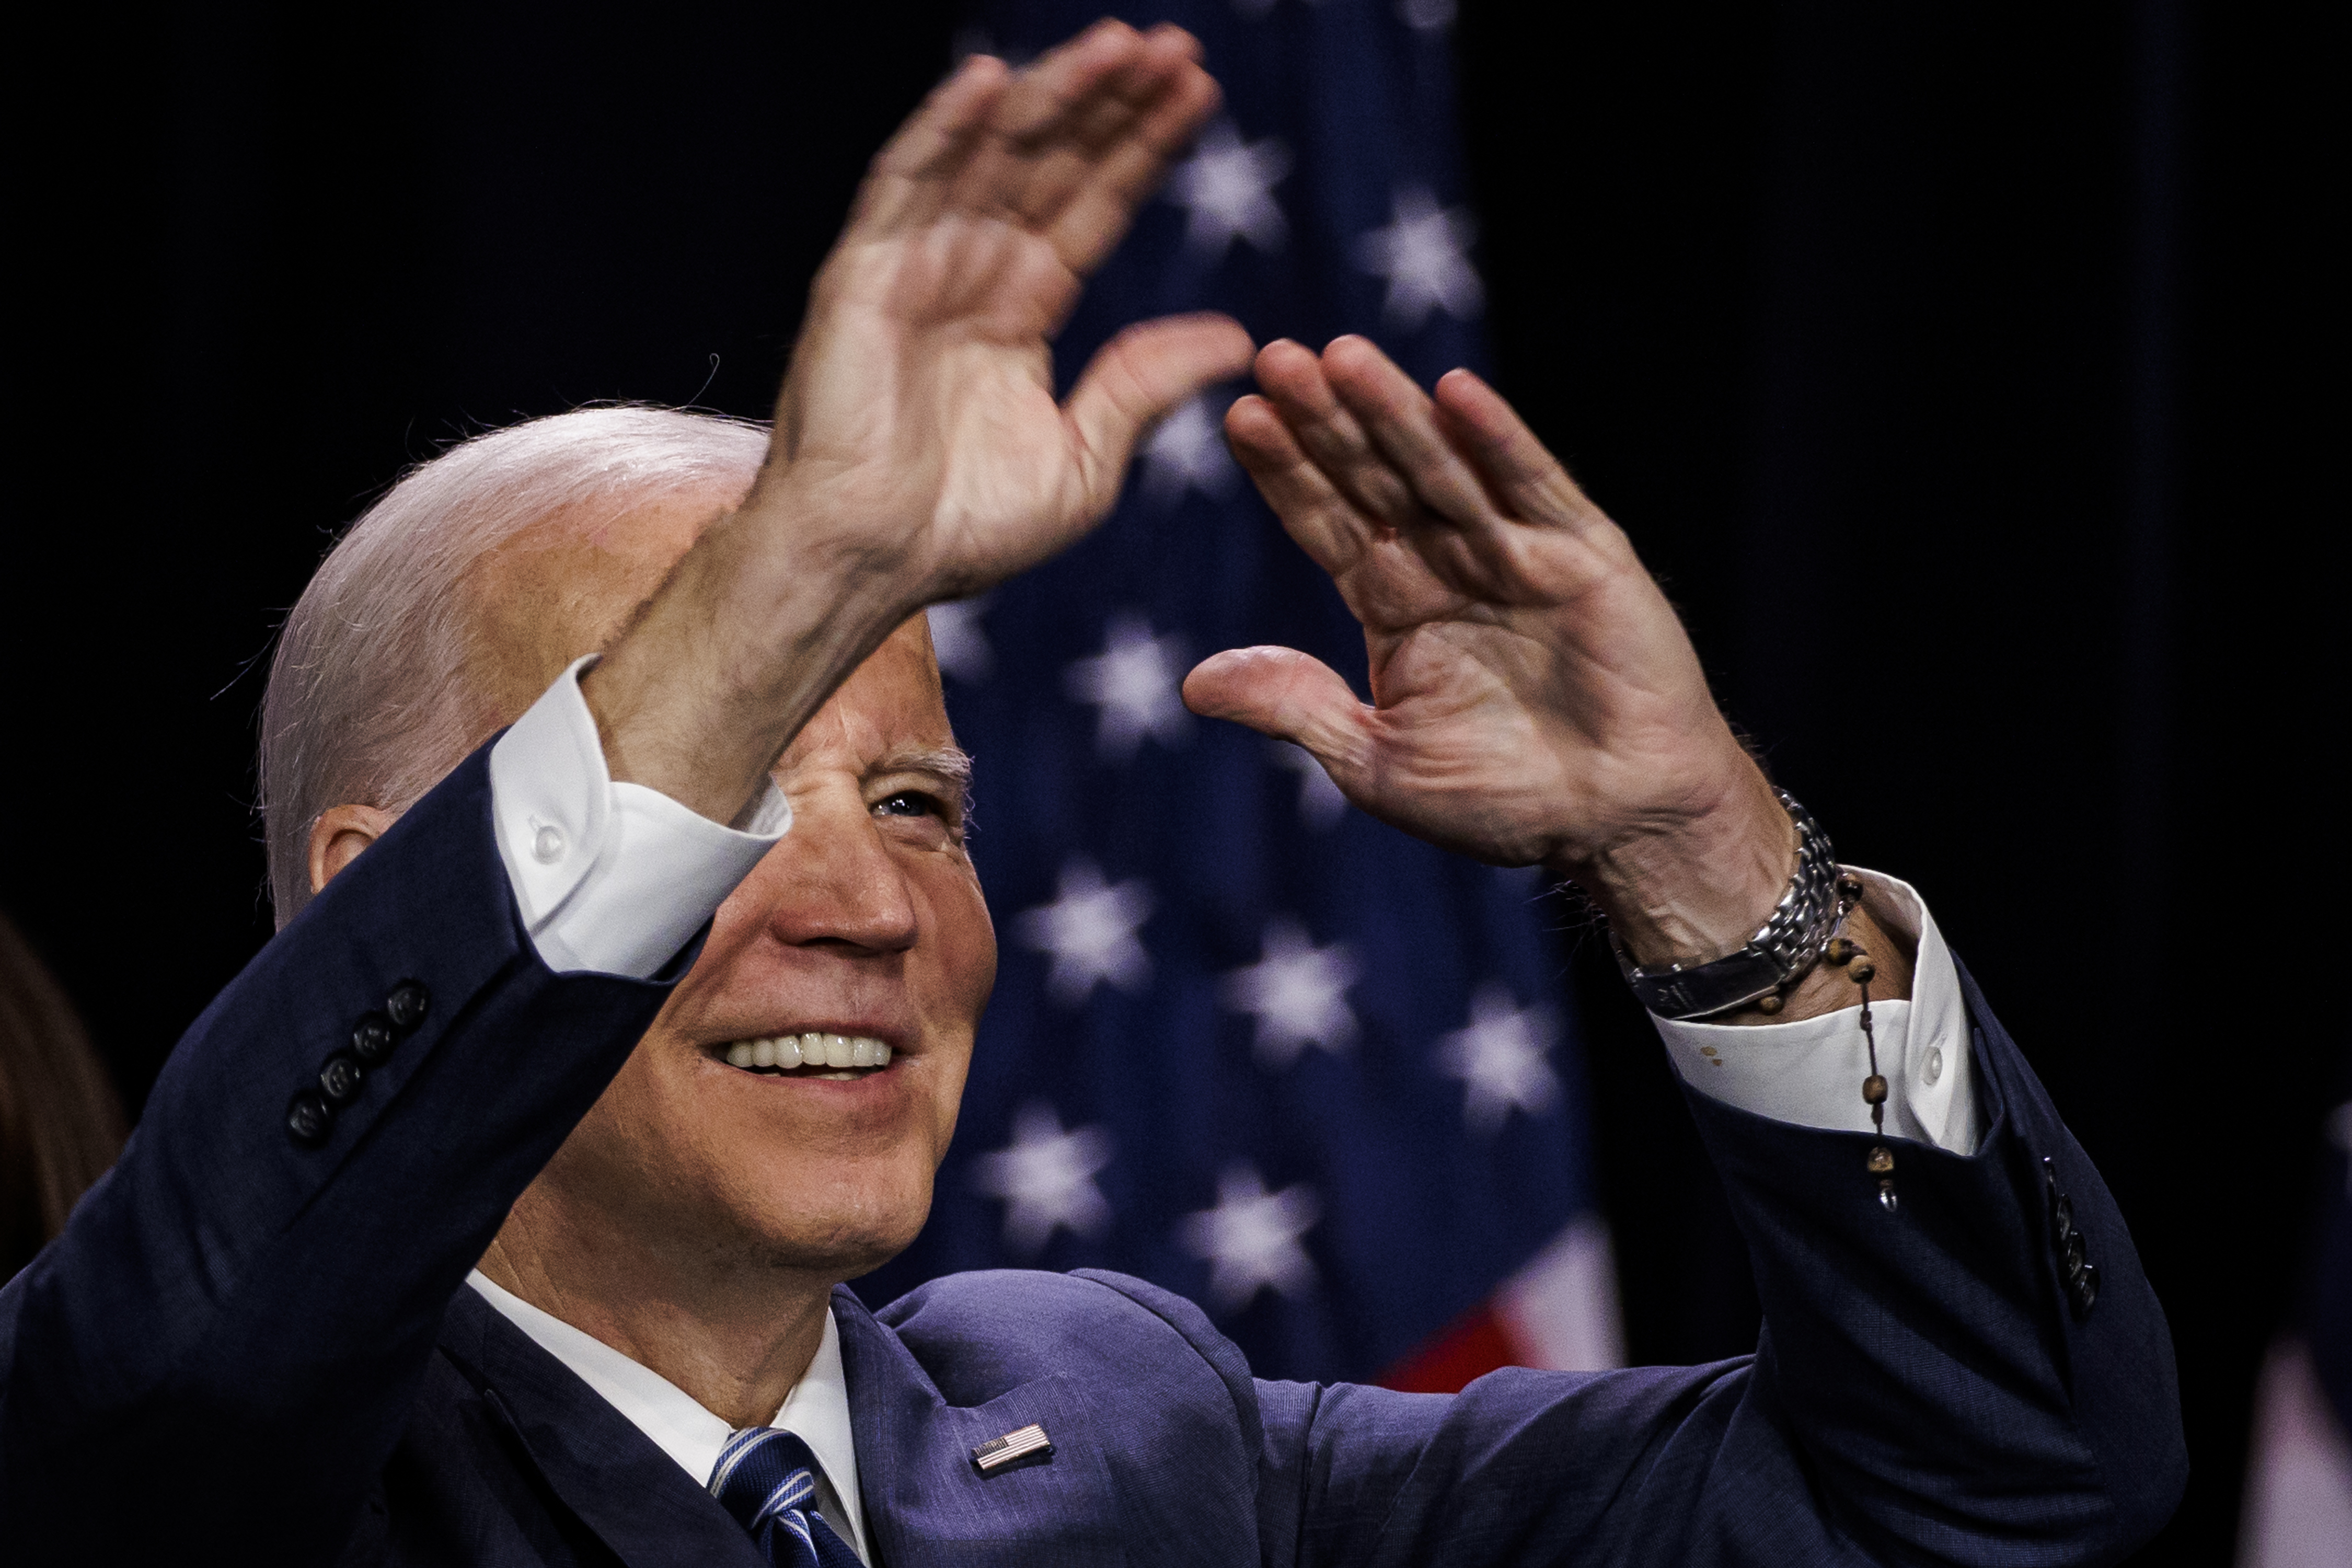 President Joe Biden waves after speaking at an event hosted by the Democratic National Committee at the Howard Theatre in Washington, DC.